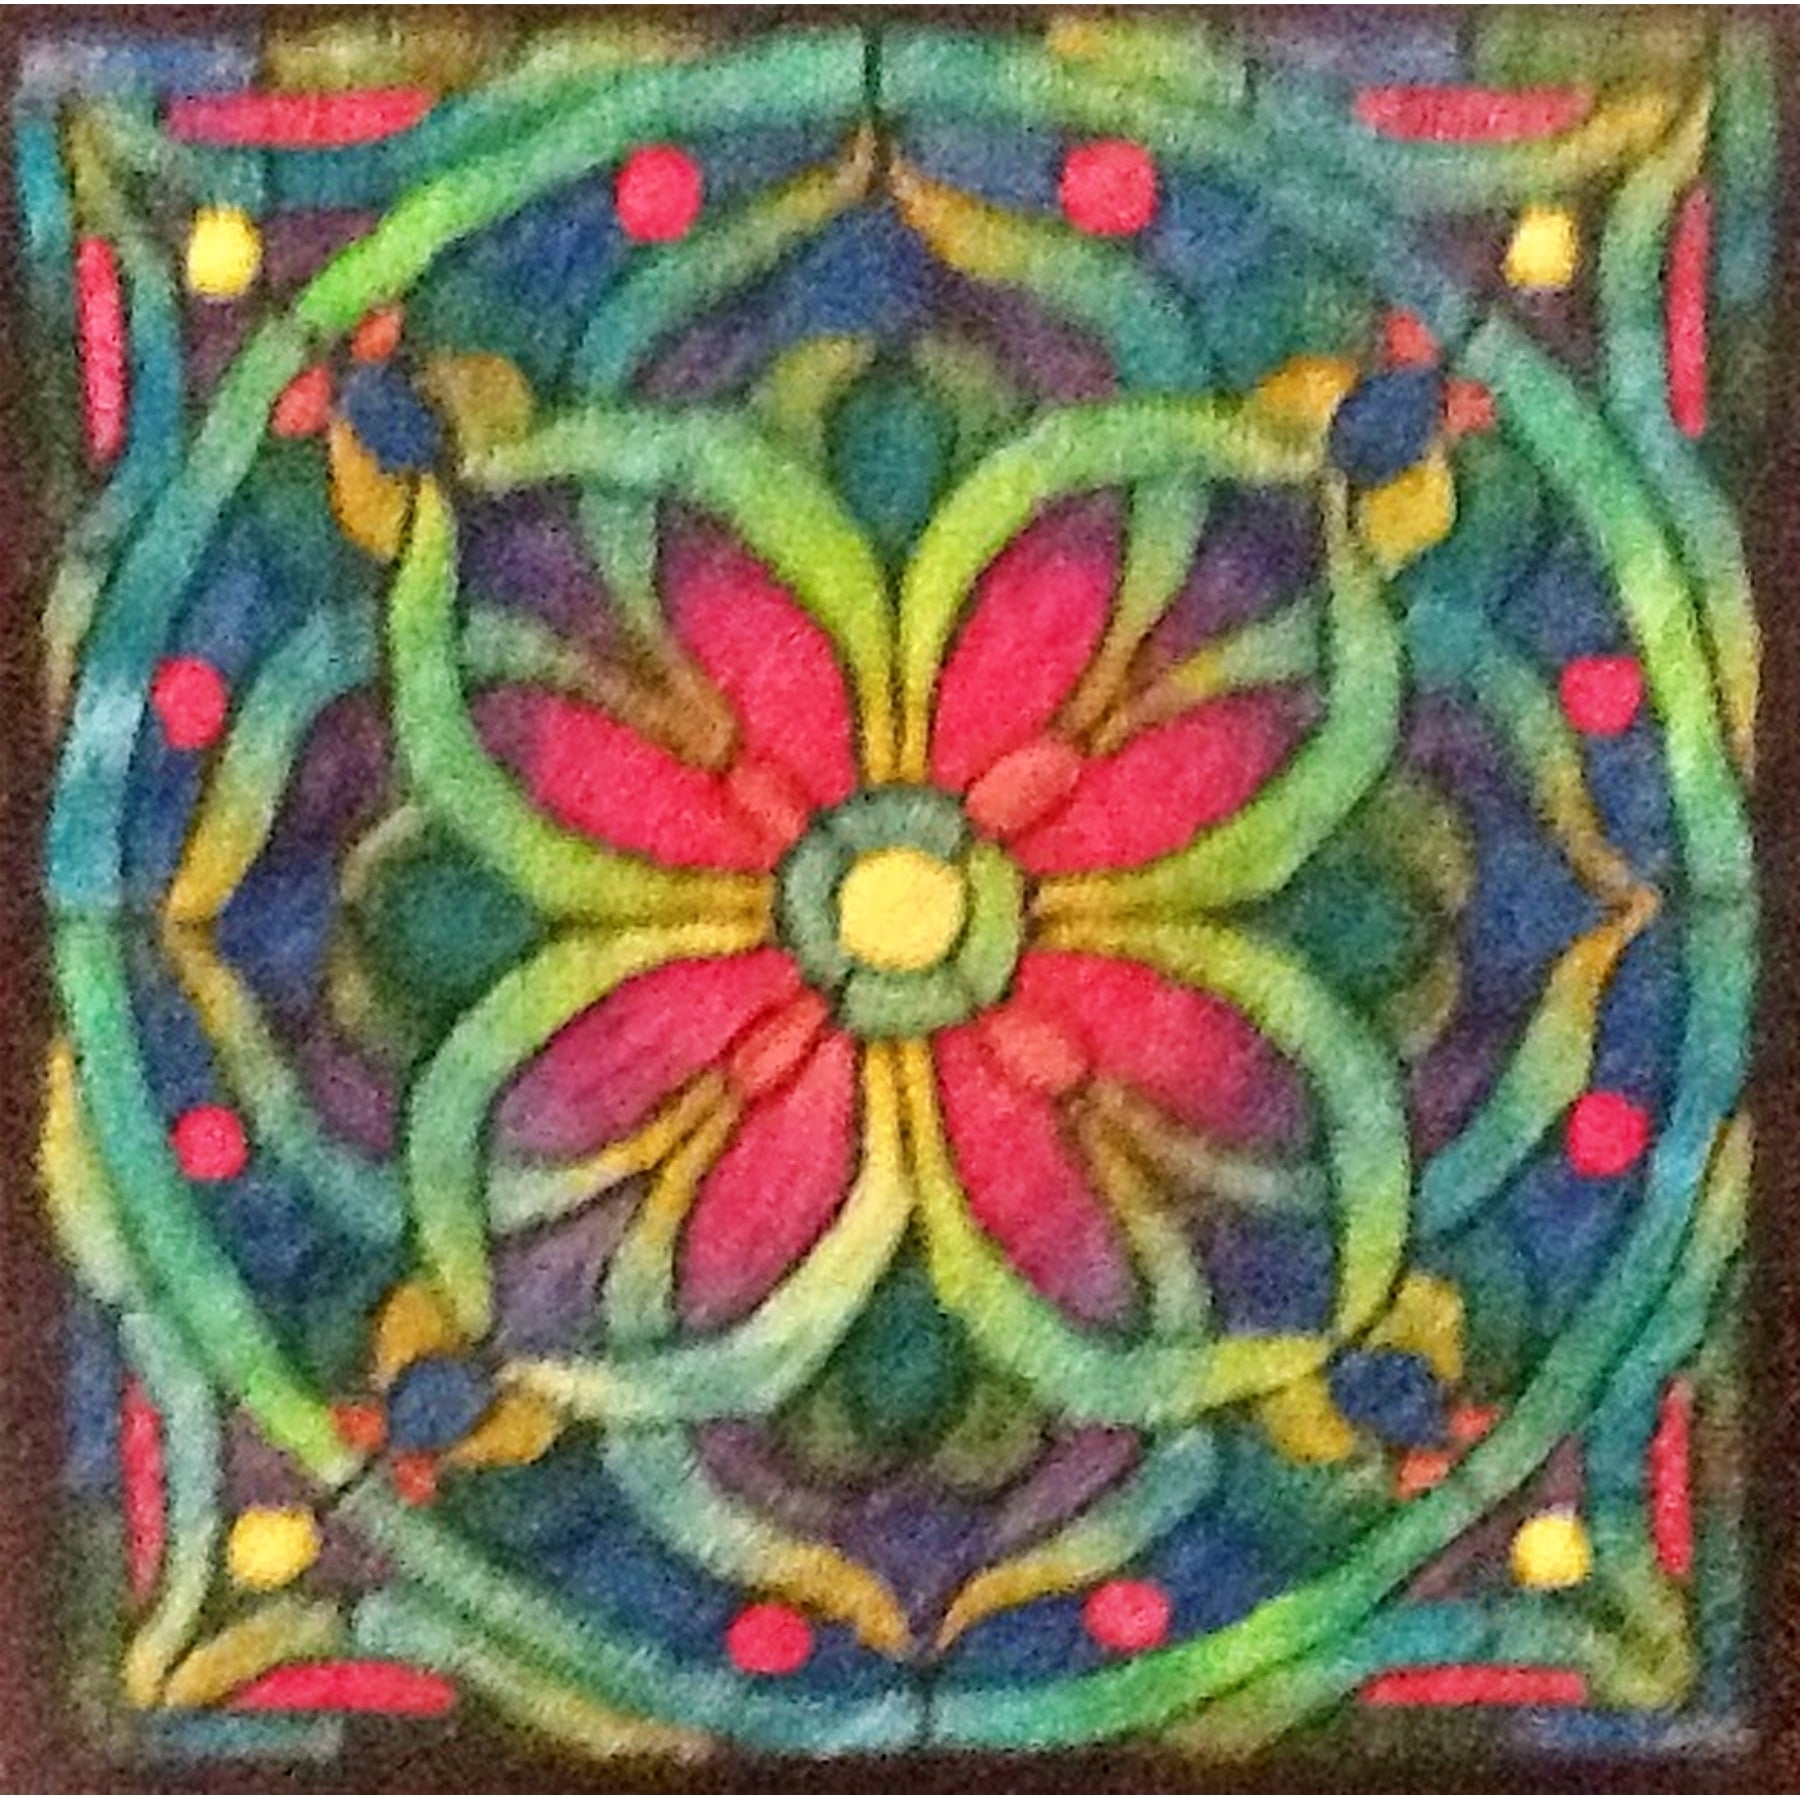 Stained Glass Mosaic, rug hooked by Angela Foote